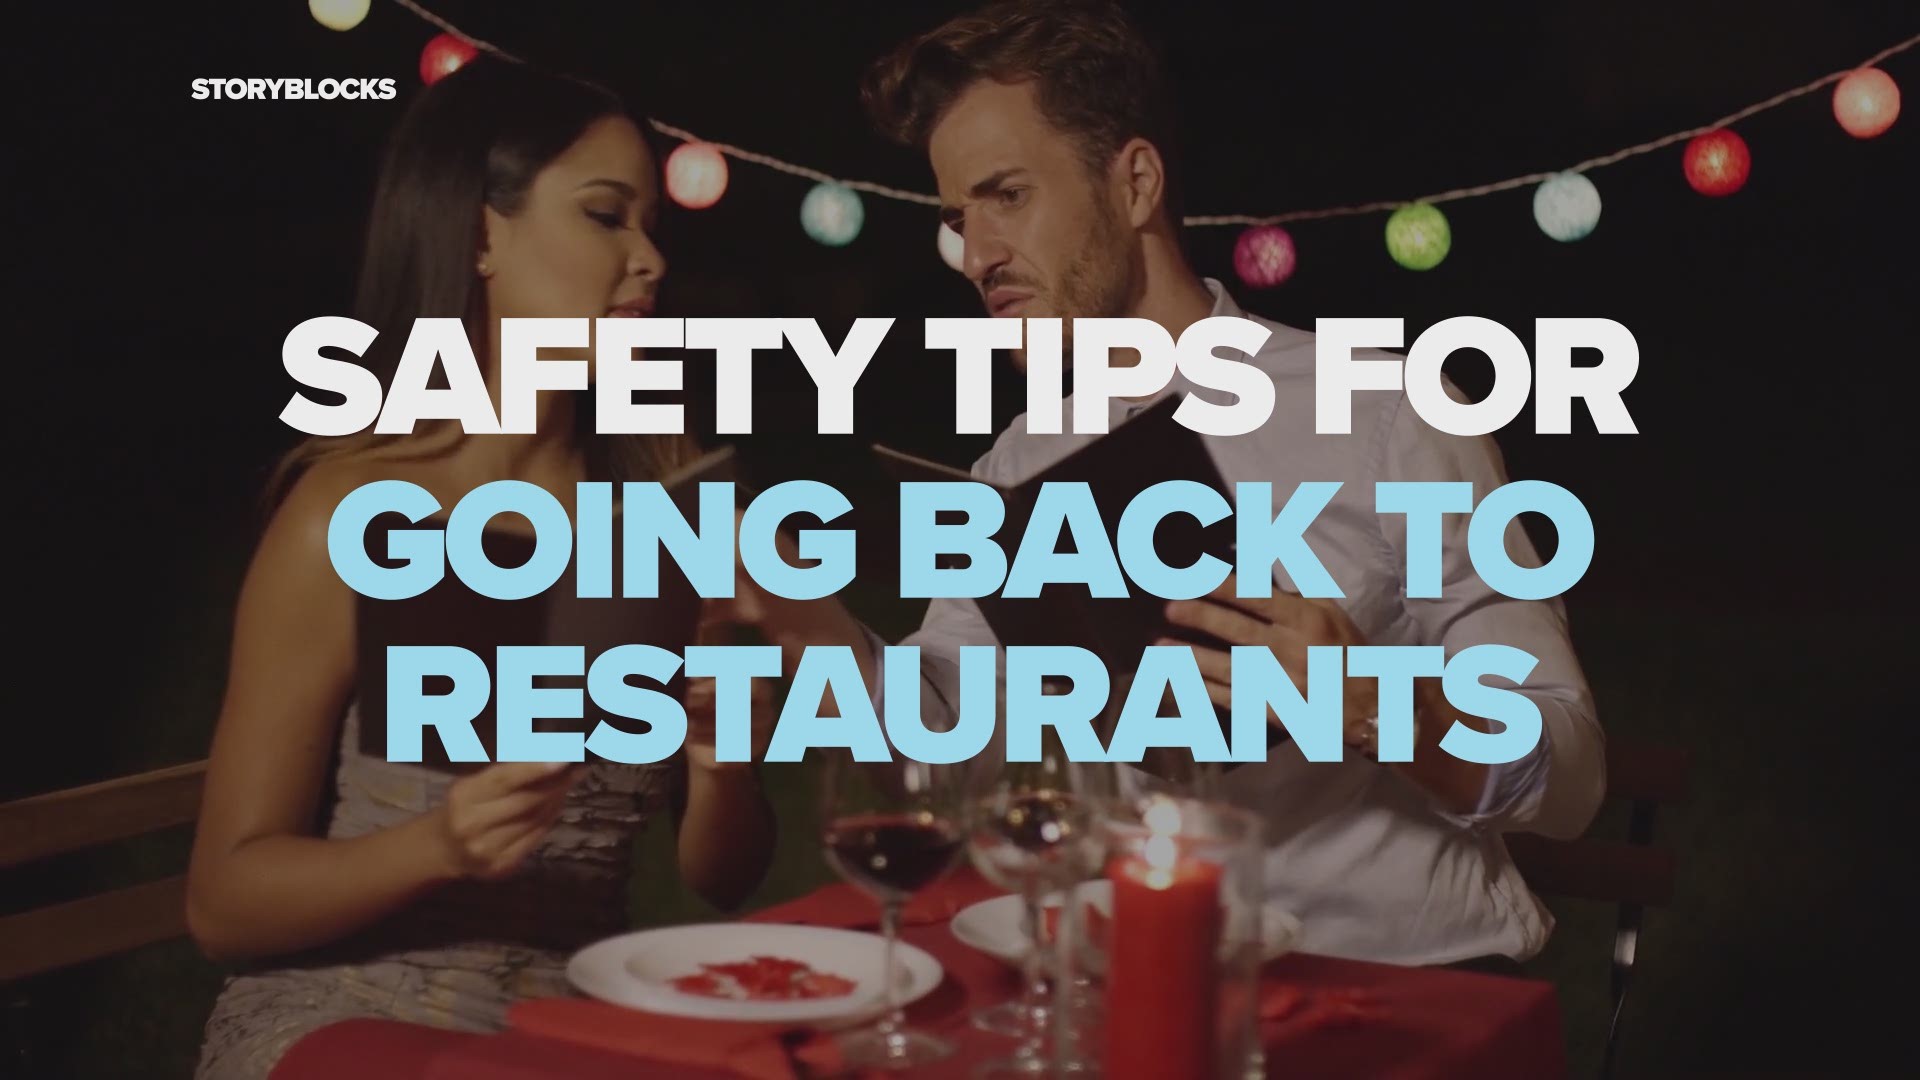 If your city is beginning to reopen, here's what you need to know about returning to restaurants safely.